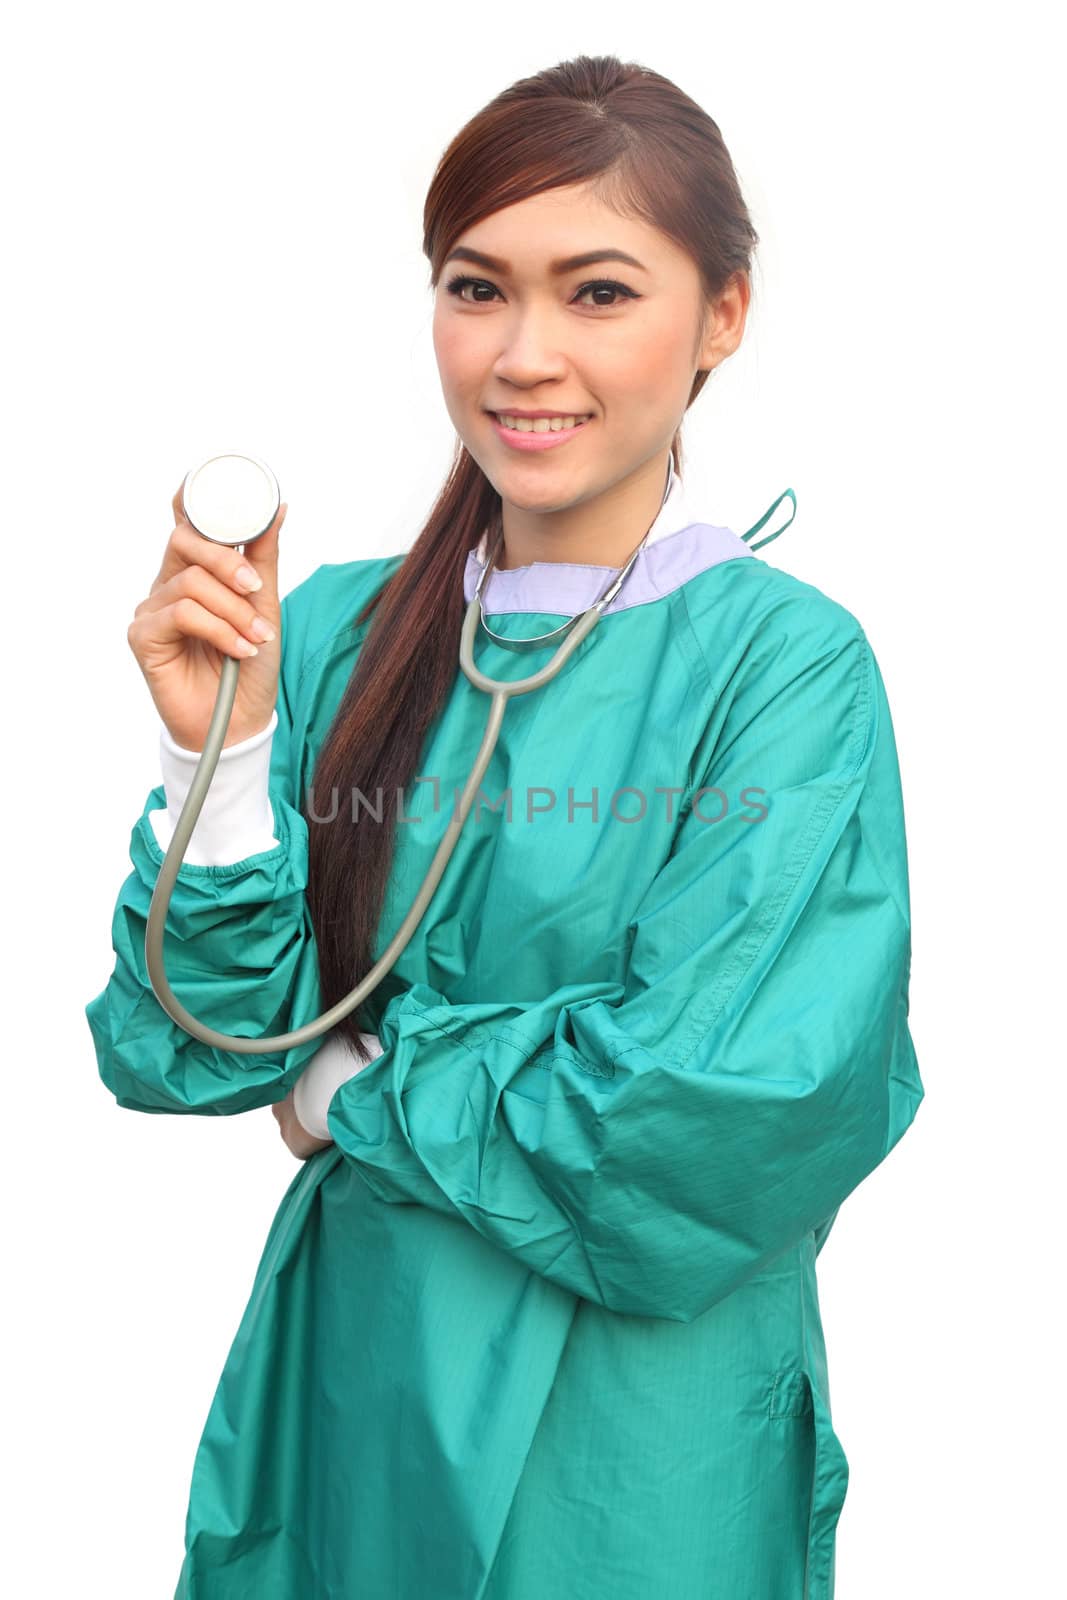 female doctor wearing a green scrubs and stethoscope by geargodz